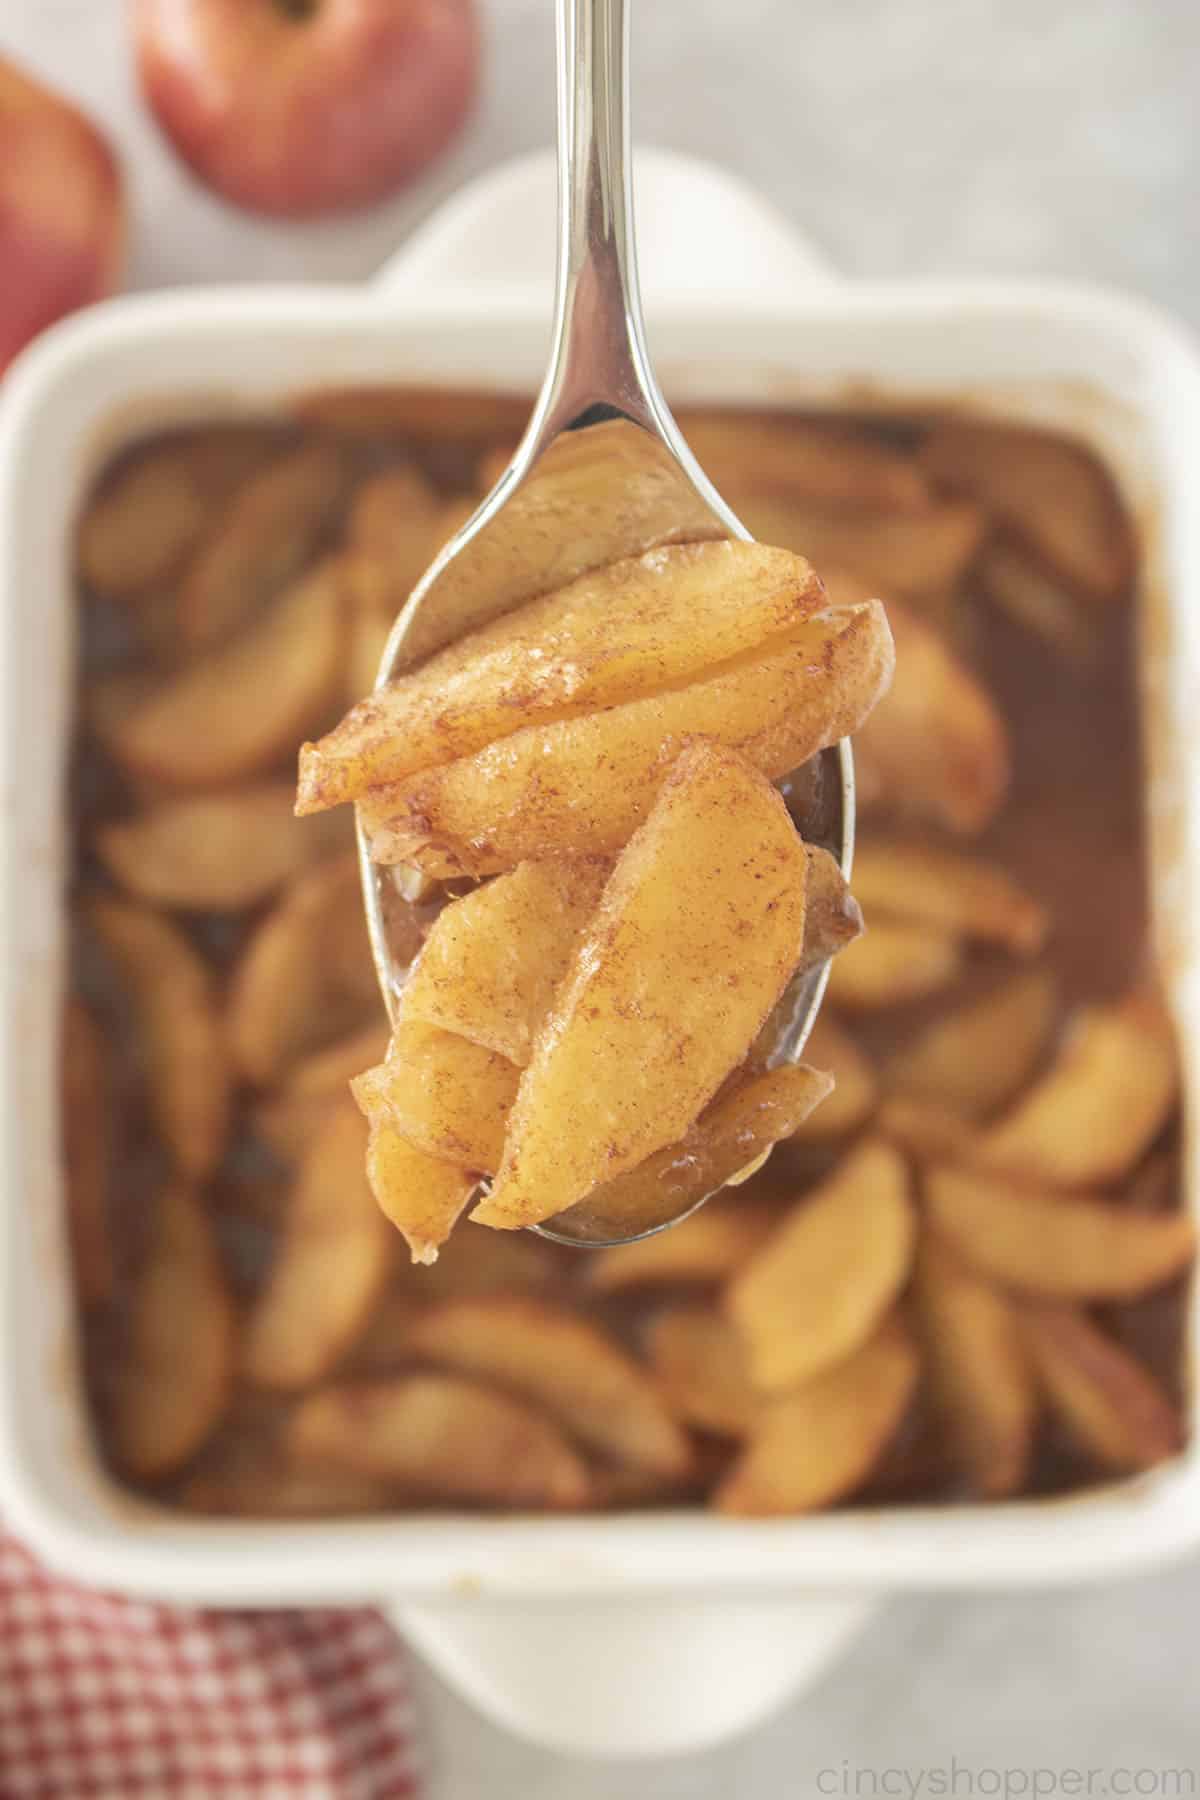 Spoon with Baked Cinnamon Apples.